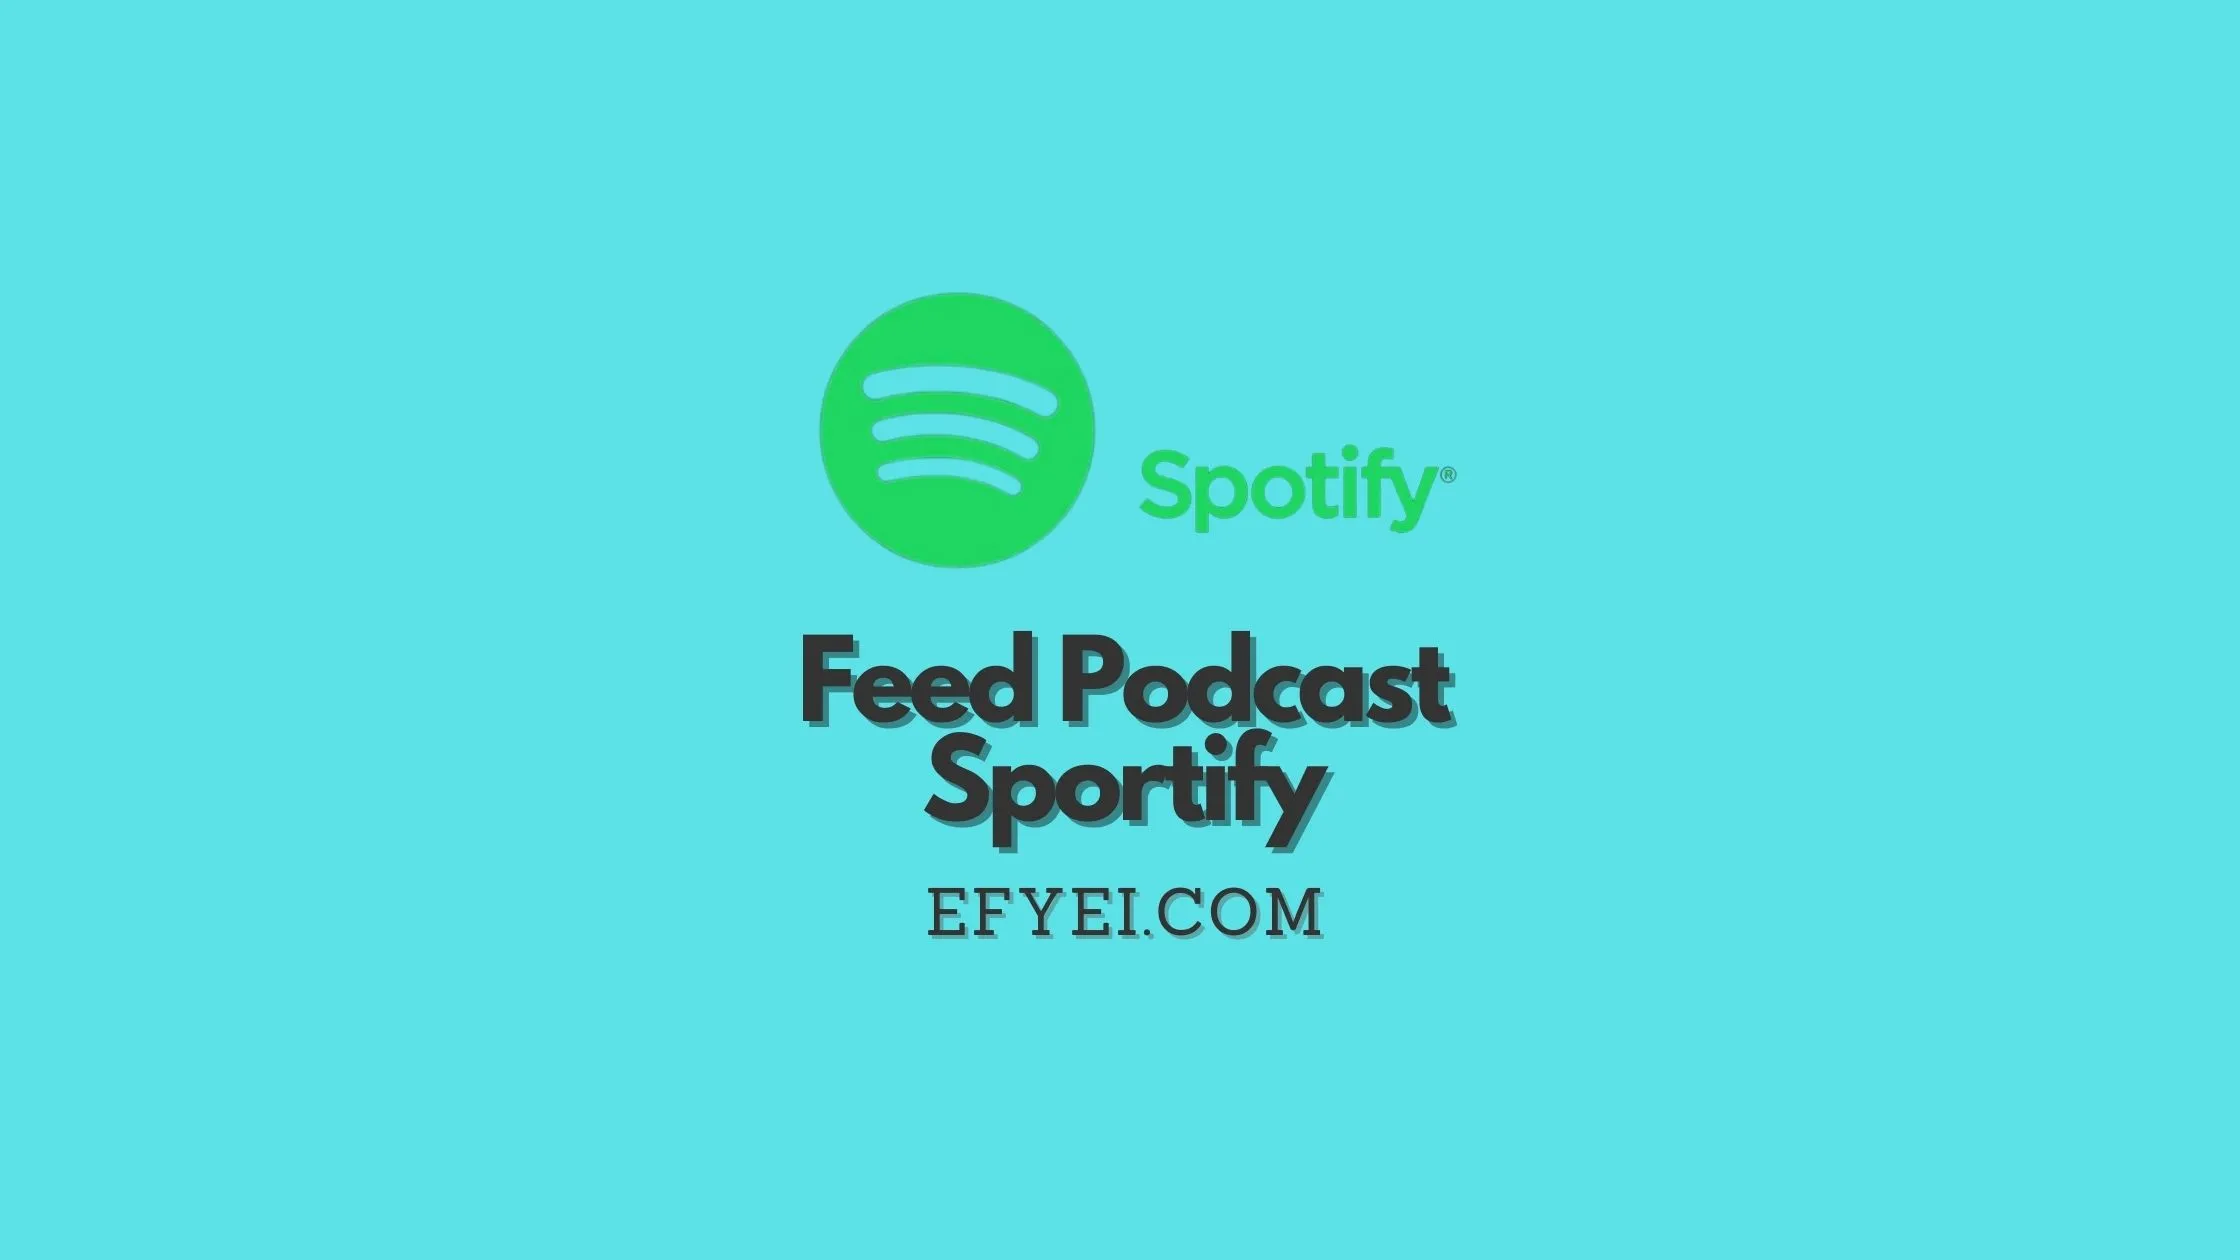 Feed Podcast sportify